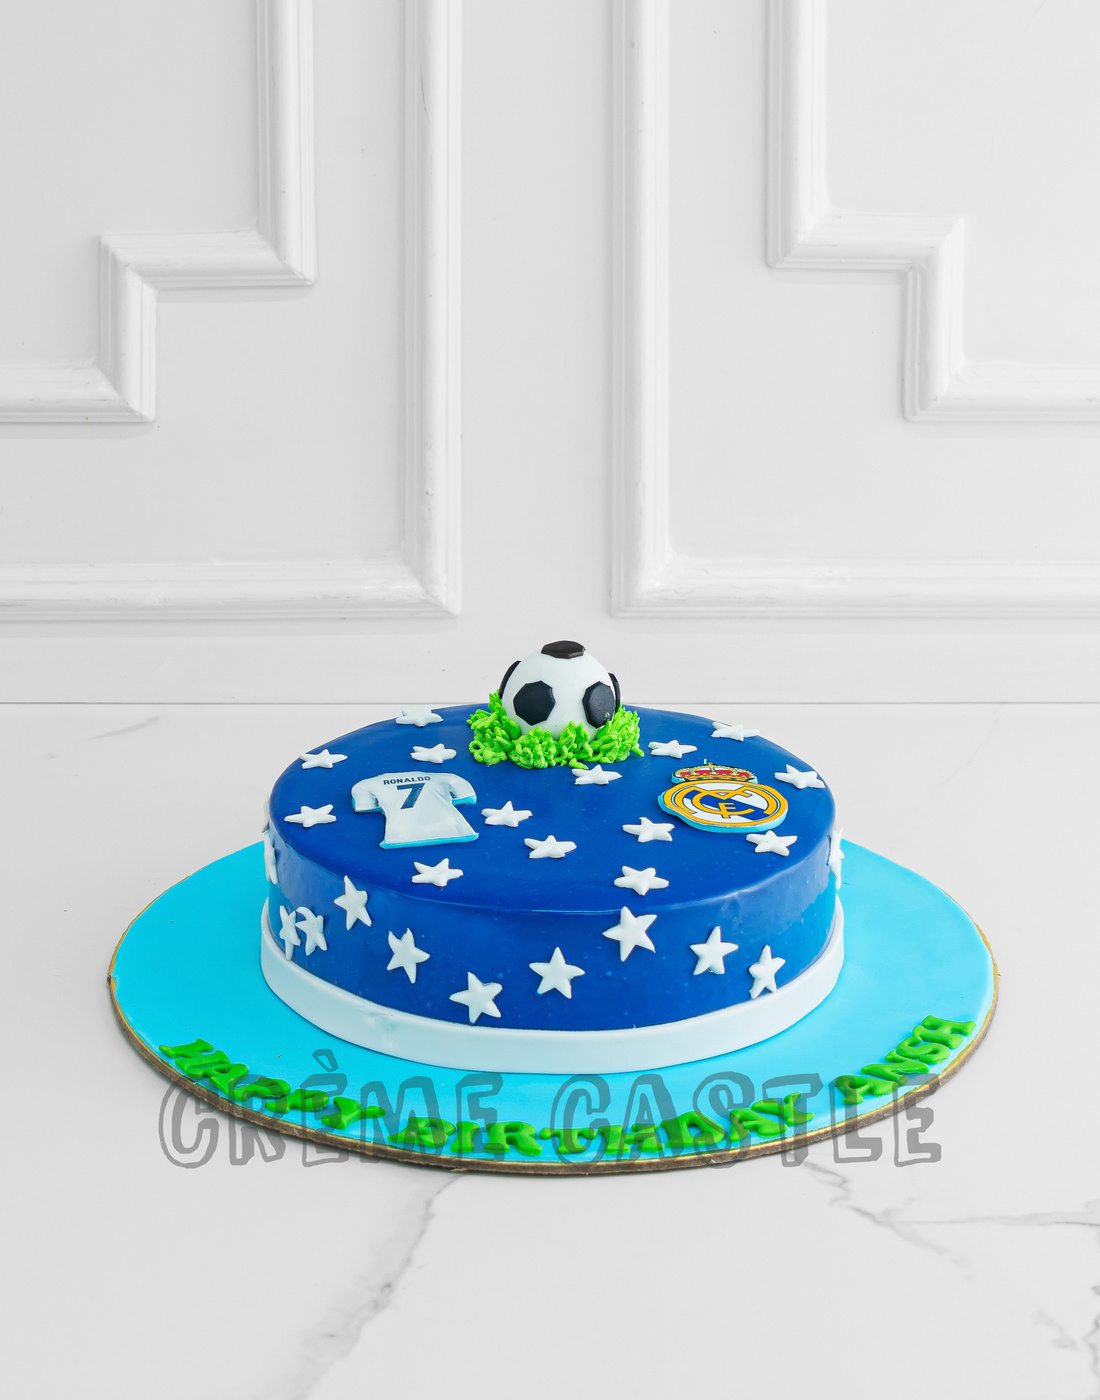 3D Real Madrid Football Jersey T-shirt shaped cake | Flickr